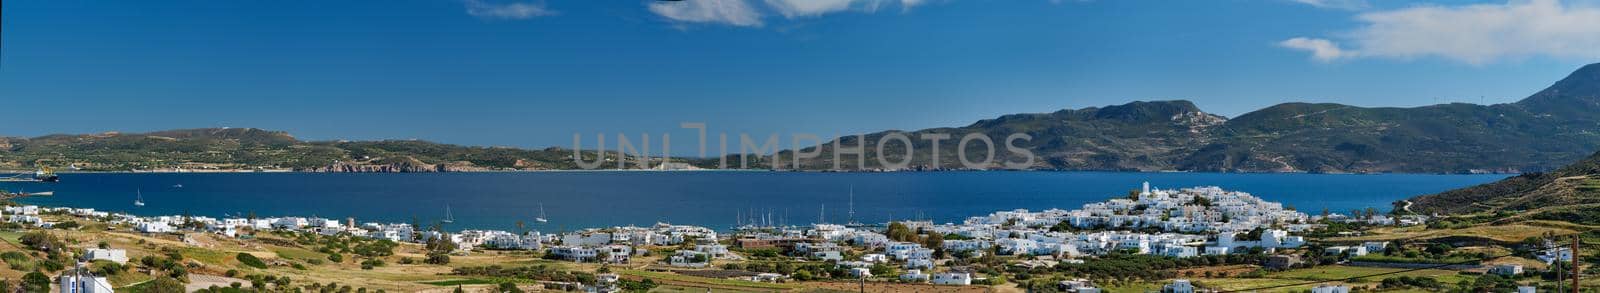 Panorama of Plaka village with traditional Greek church white painted Greek houses and ocean coast. Milos island, Greece